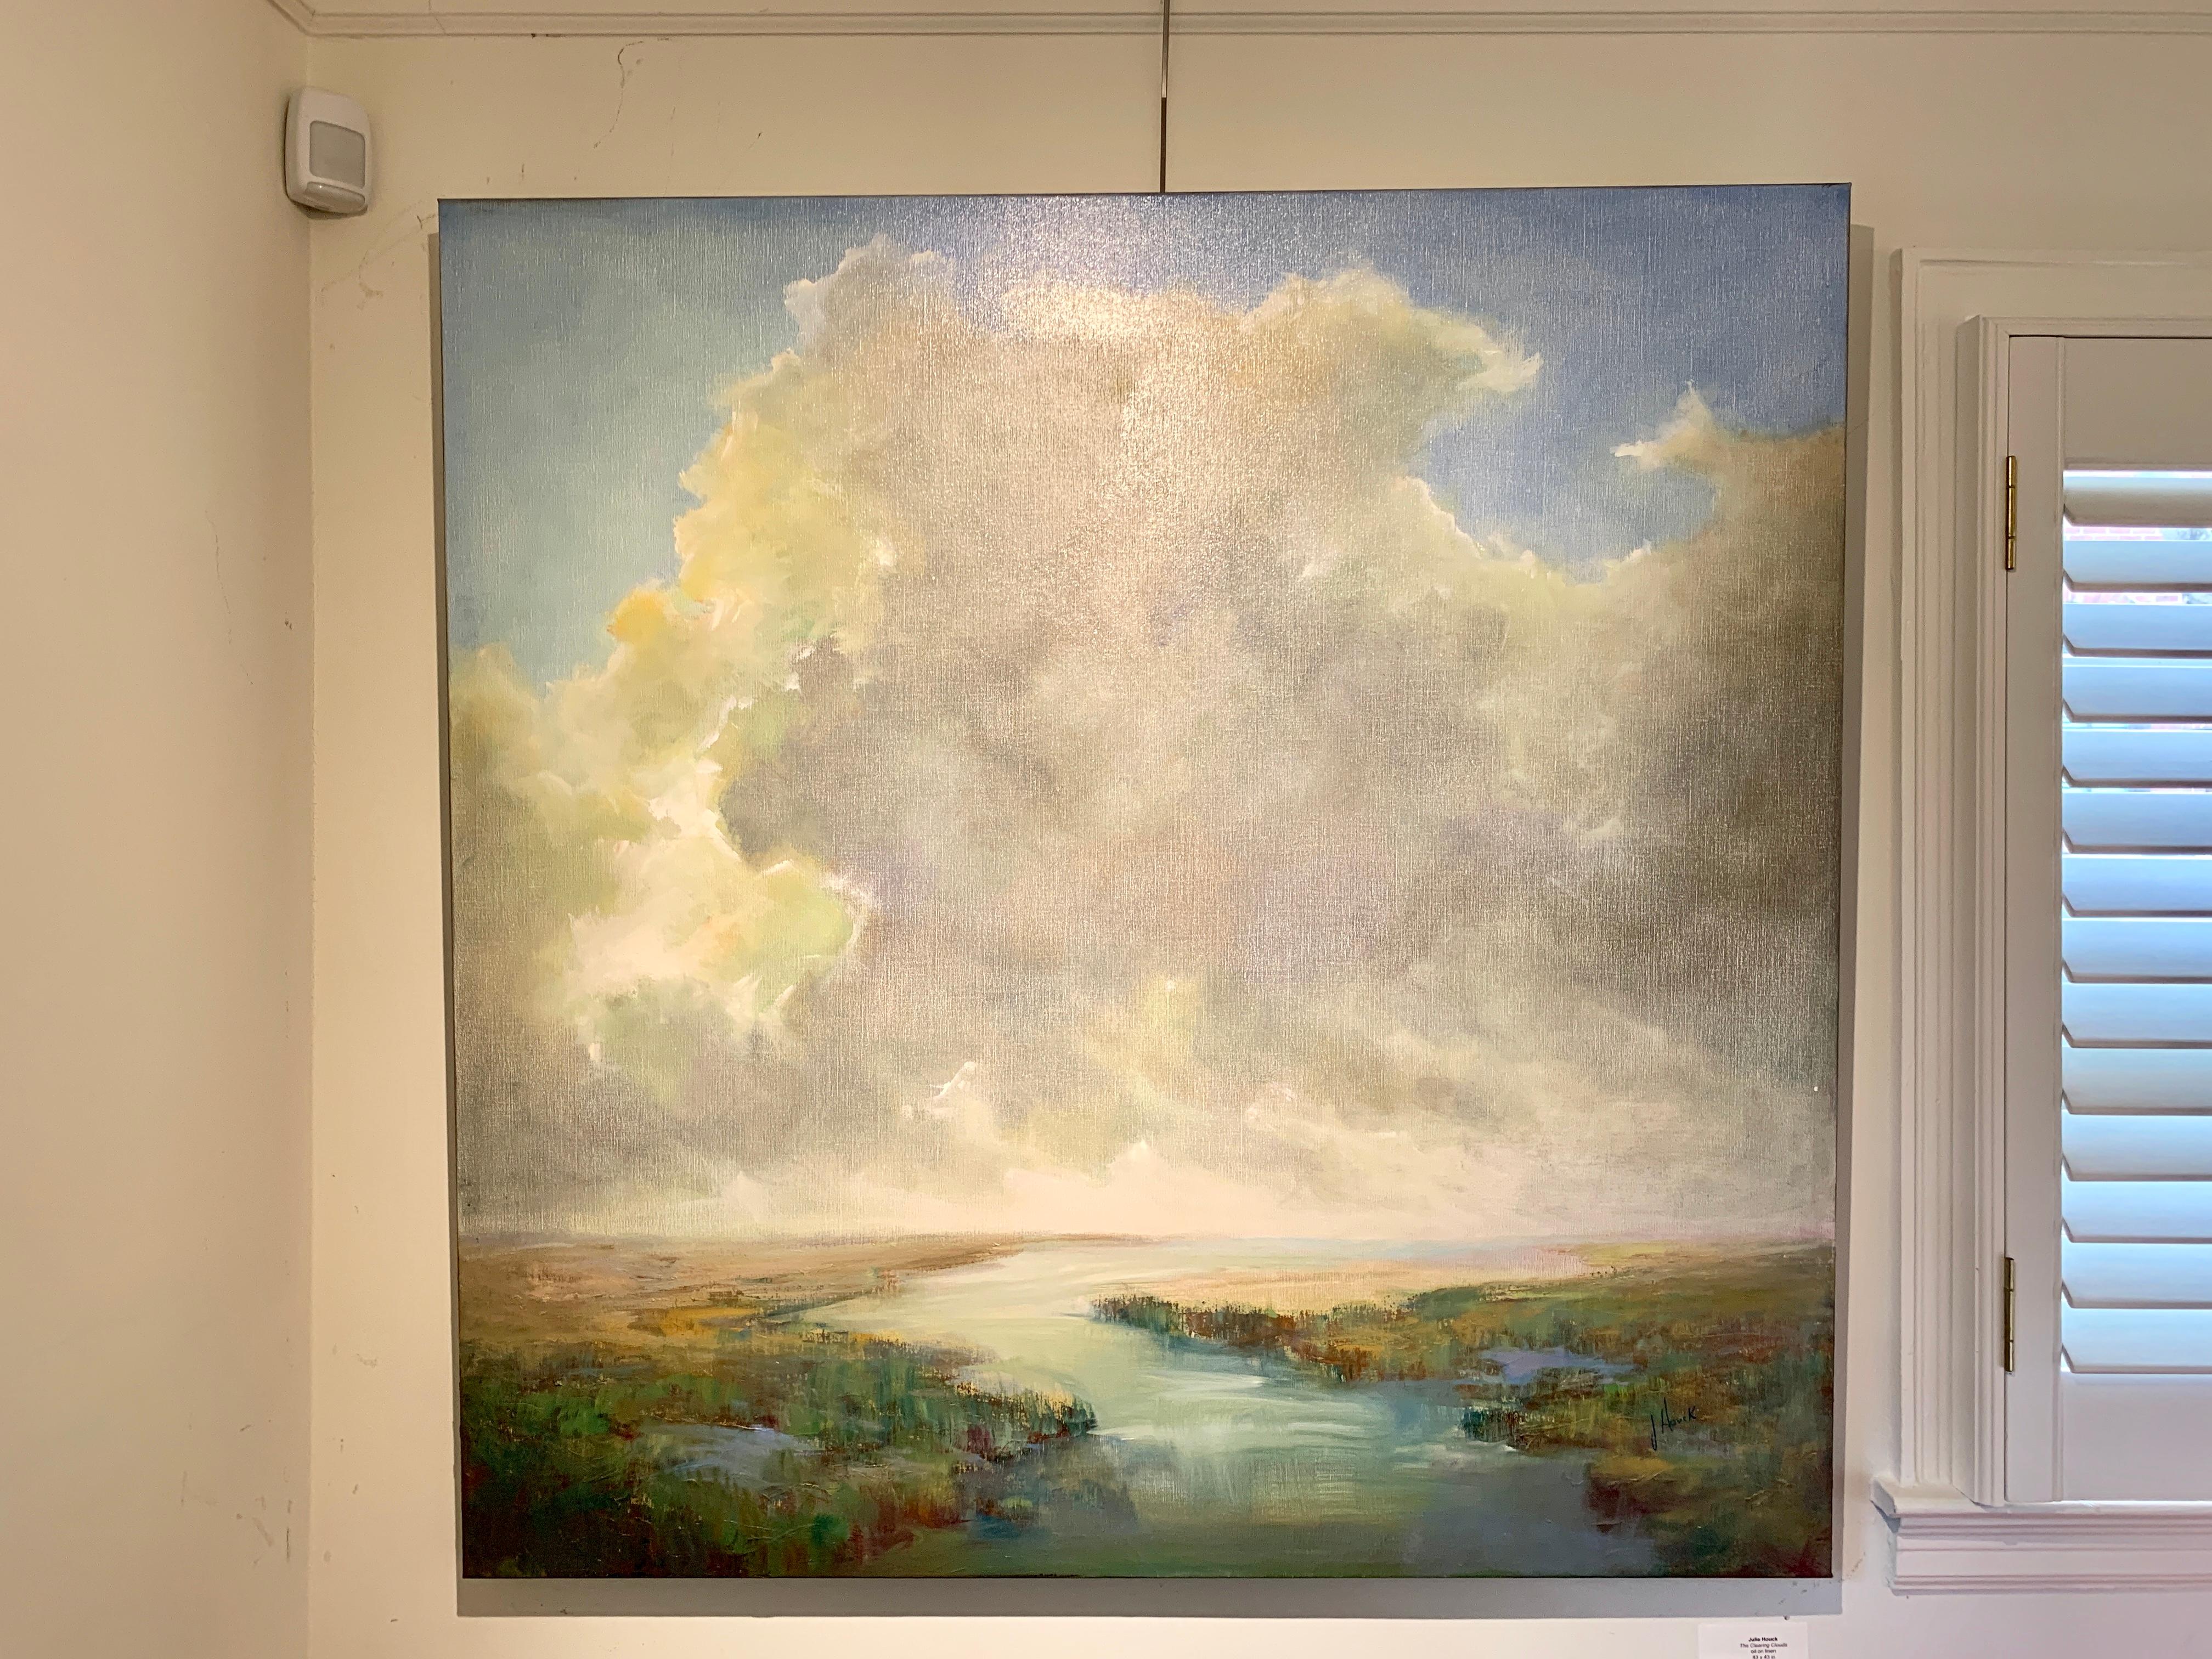 'The Clearing Clouds' is a large Post-Impressionist oil on linen landscape painting of square format created by American artist Julie Houck in 2019. Featuring a luminous palette mostly made of blue, green, grey, soft yellow and white tones, the